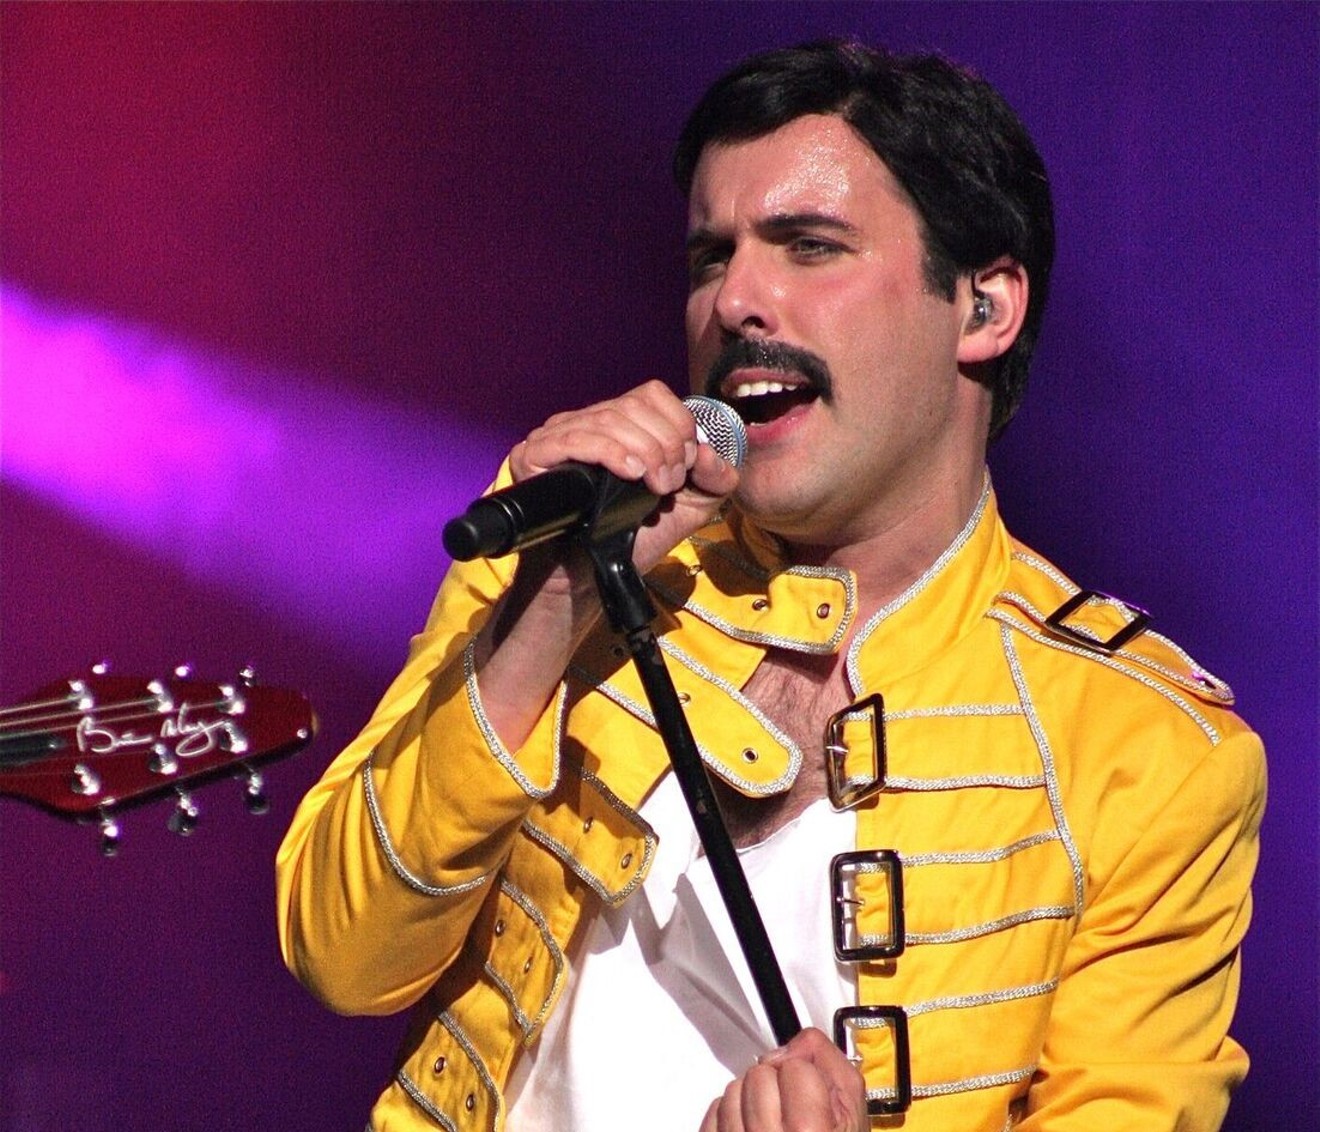 Patrick Myers channels Freddie Mercury in the singer's iconic yellow military-style jacket.